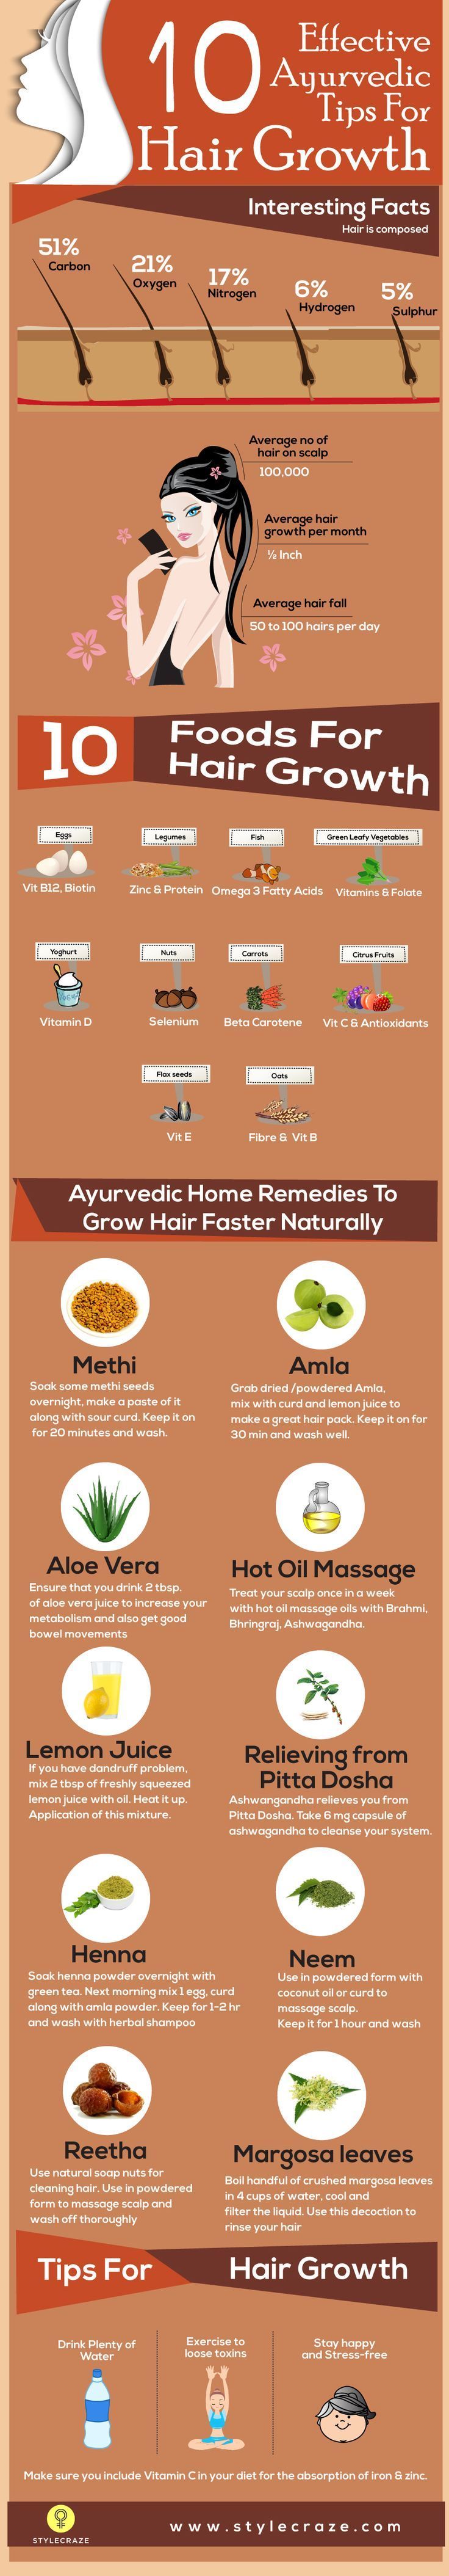 Nothing works better than natural ingredients for hair growth and care! Our expert Zinnia gives you 10 effective ayurvedic home